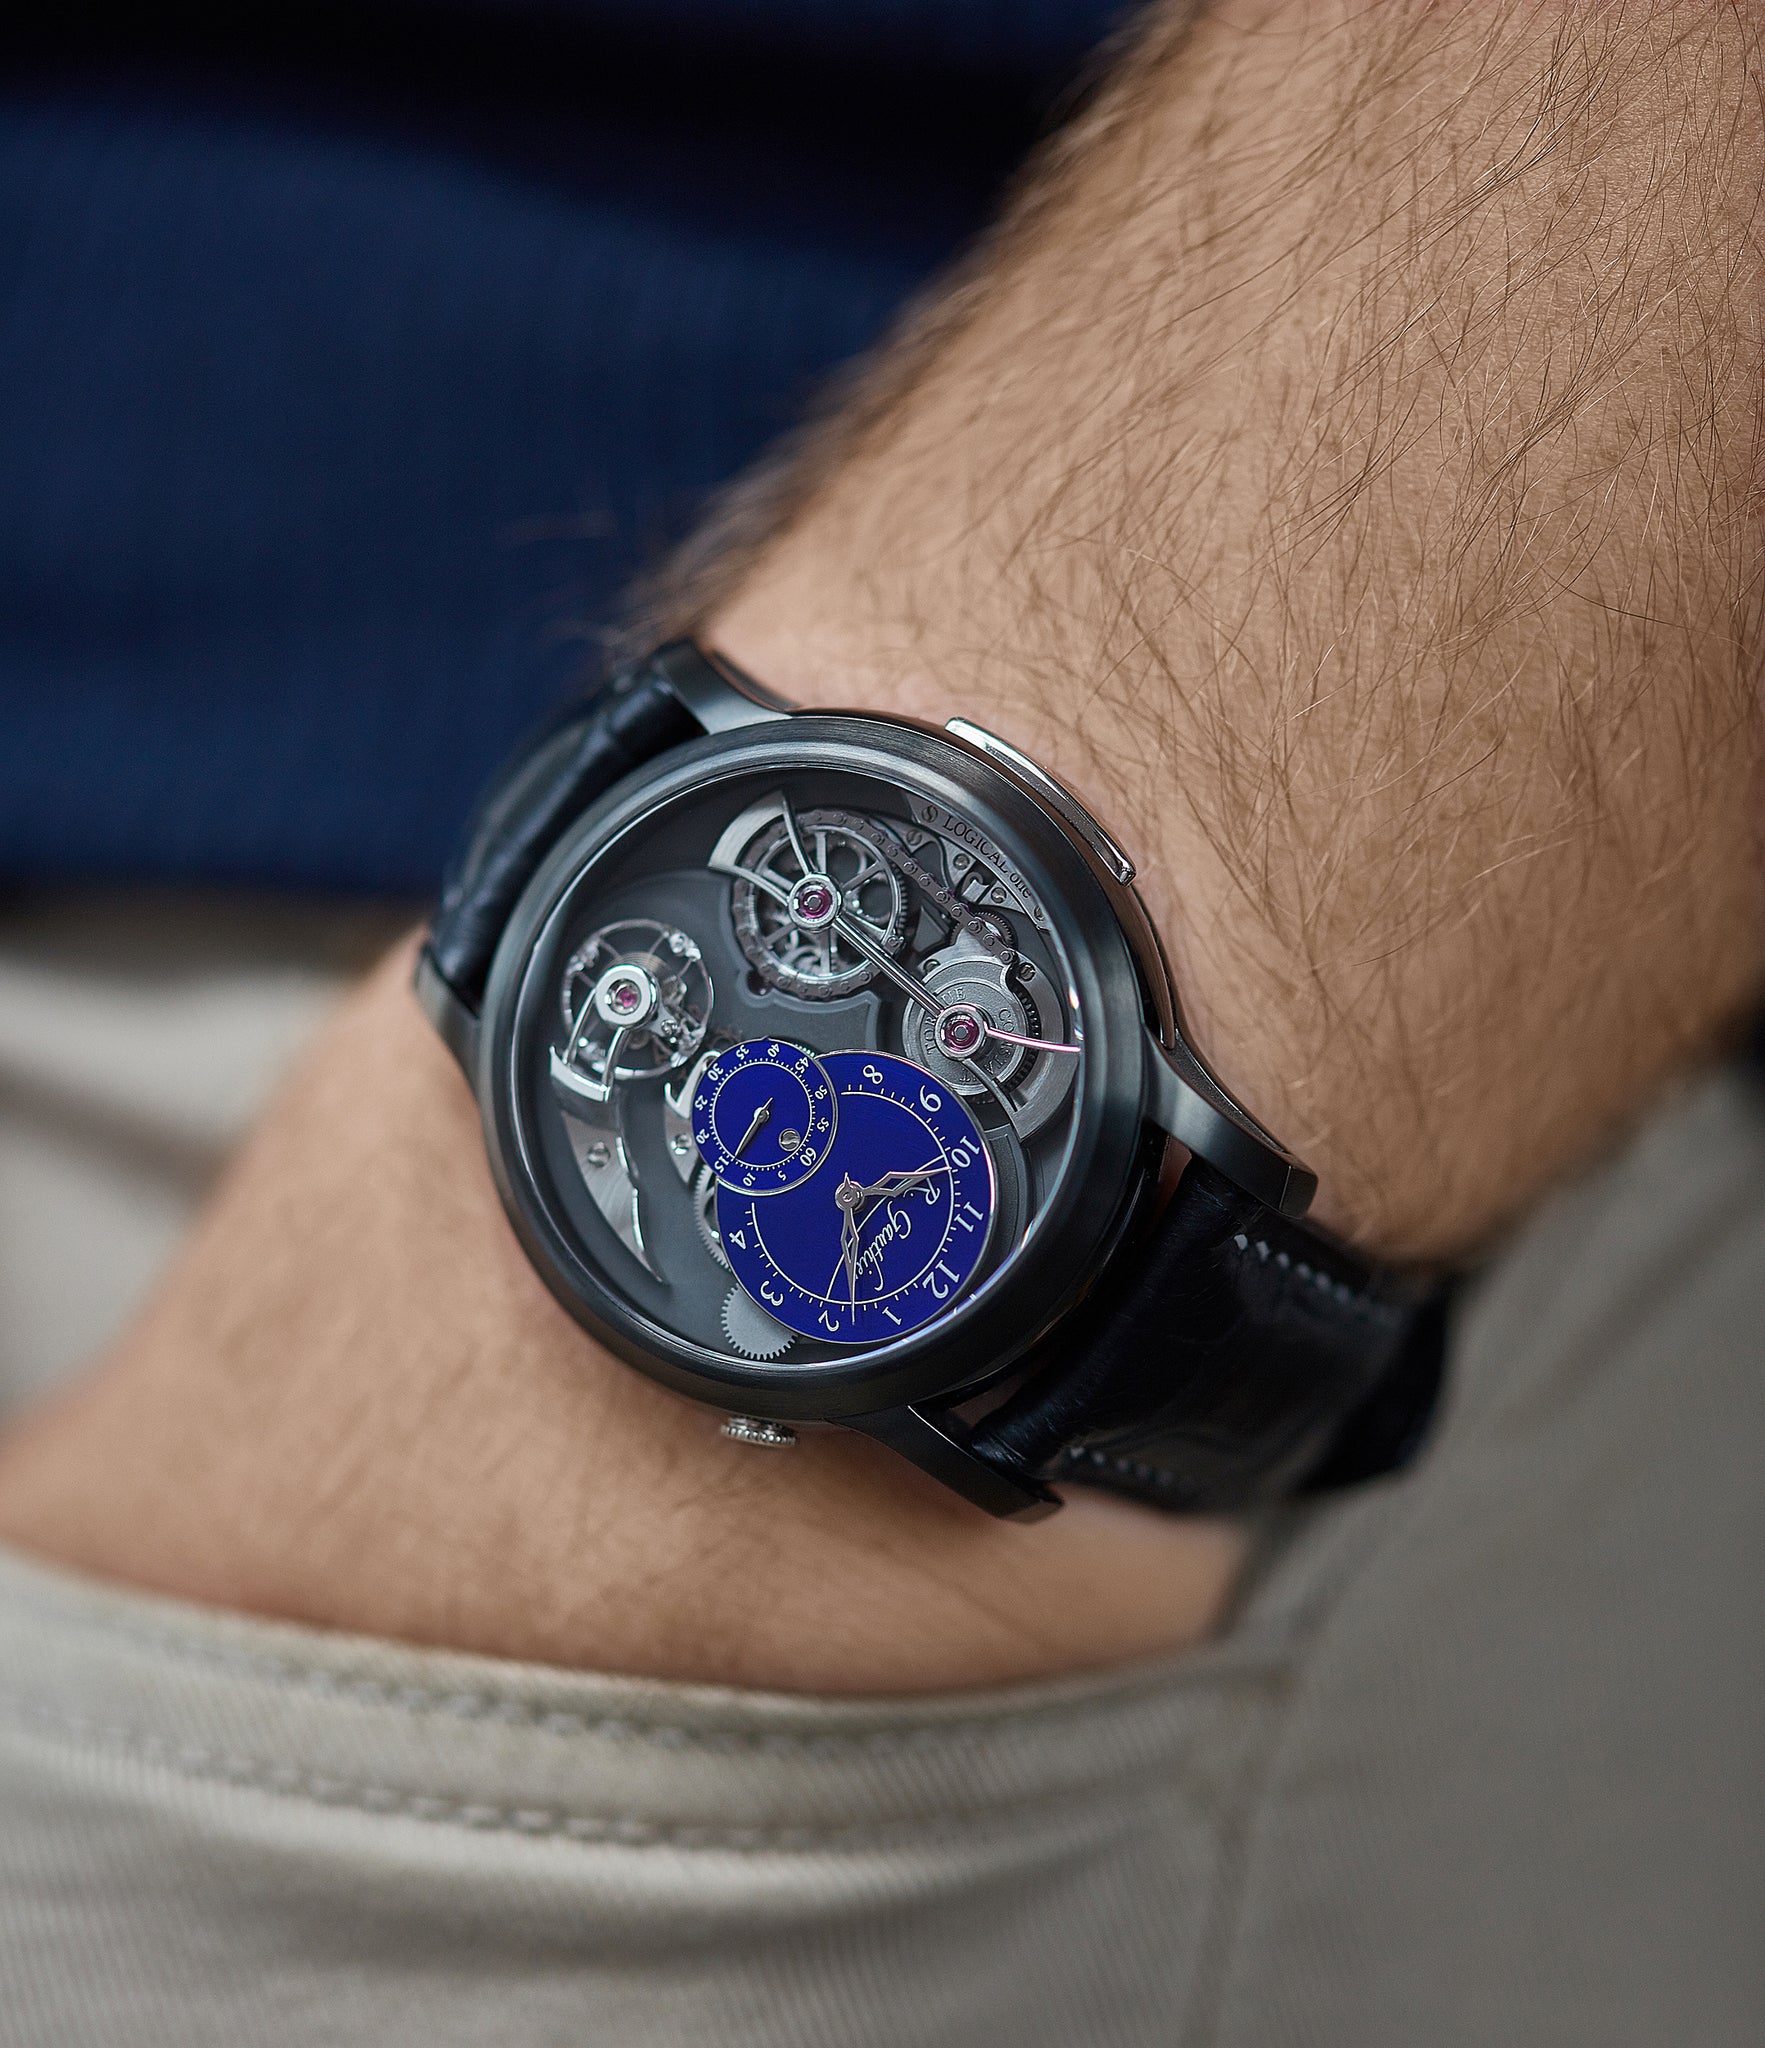 on the wrist Romain Gauthier Limited Edition Logical One BTG titanium watch blue enamel dial for sale online at A Collected Man London UK specialist of independent watchmakers